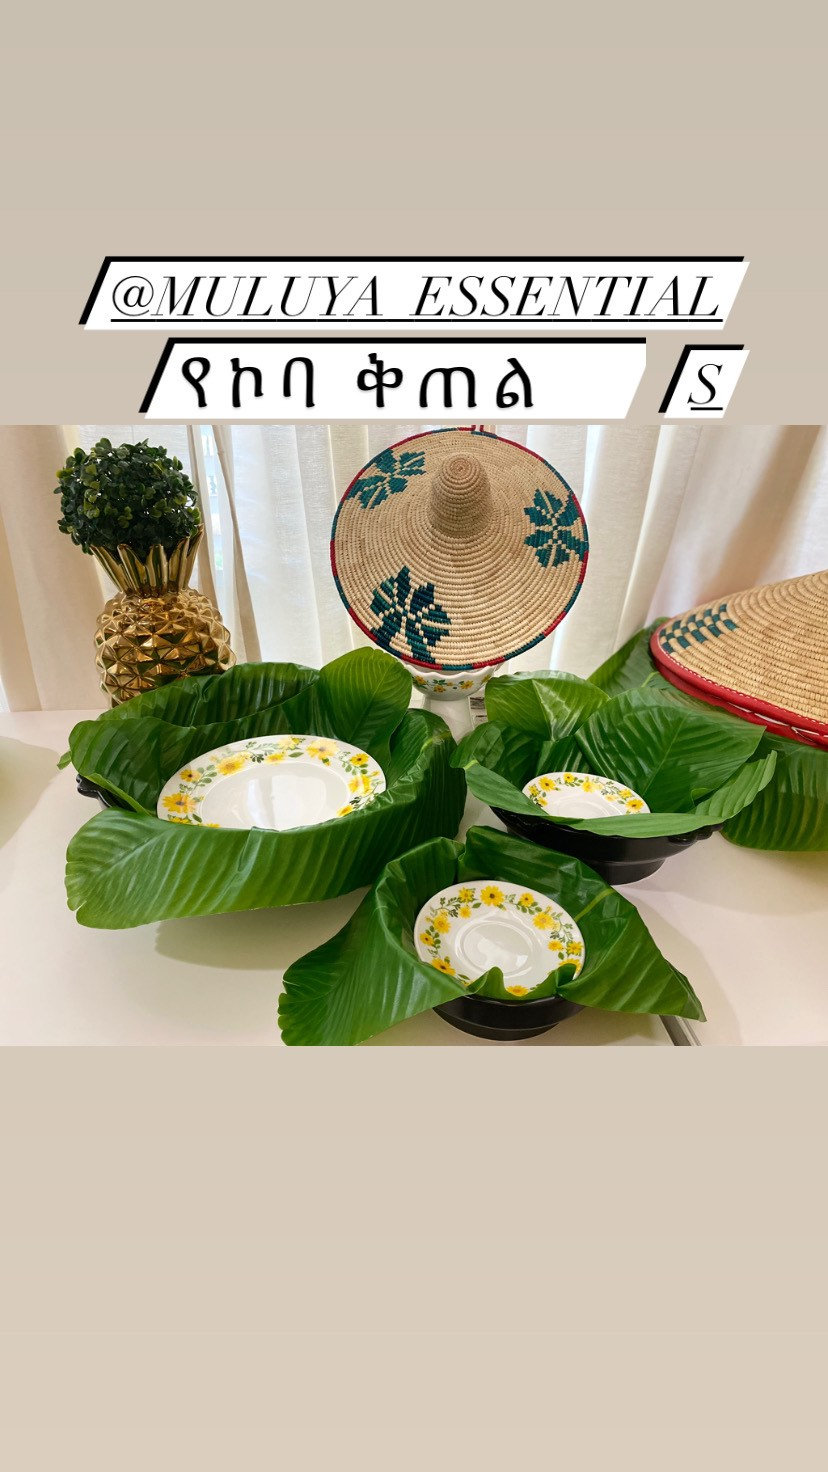 Heavenly Round Shape Banana Leaf Plate 10''inch Serving Melamine Platte for  All Occasions/26 CM (Pack of 1) (3)